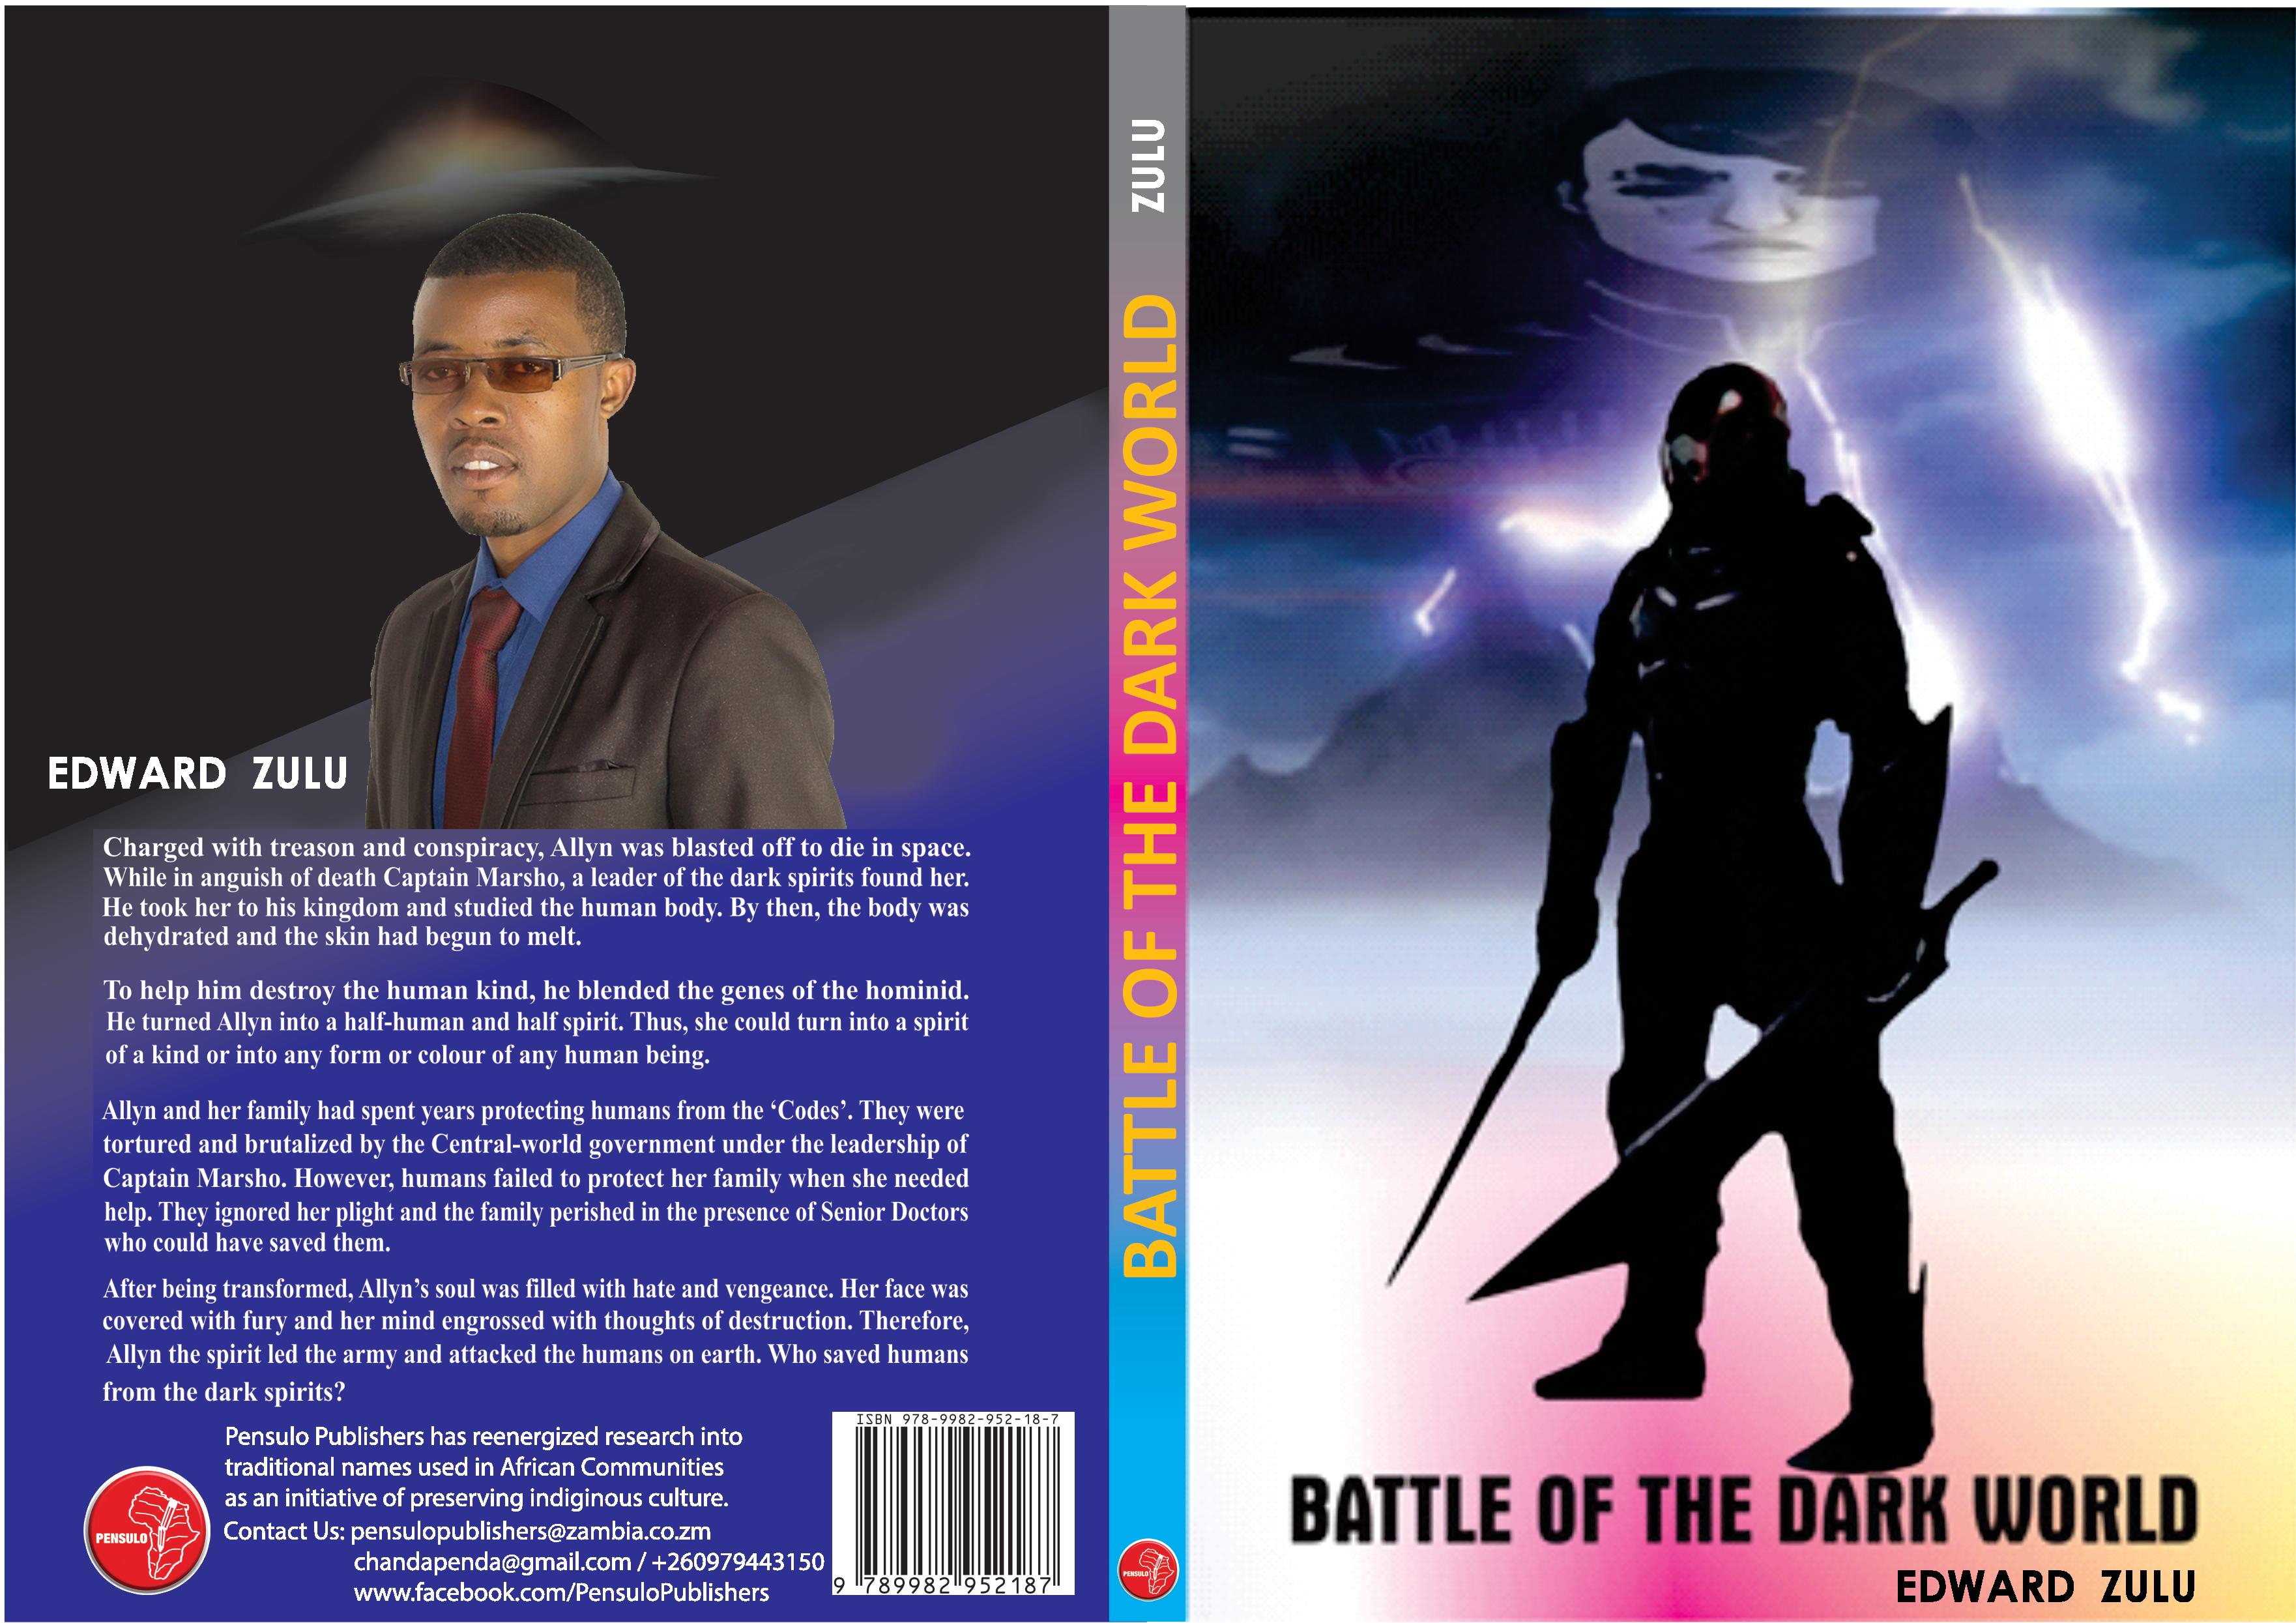 Battle of the Dark World Book is a Scientific Fiction story. I can't wait to see how great this movie will be when it is done.